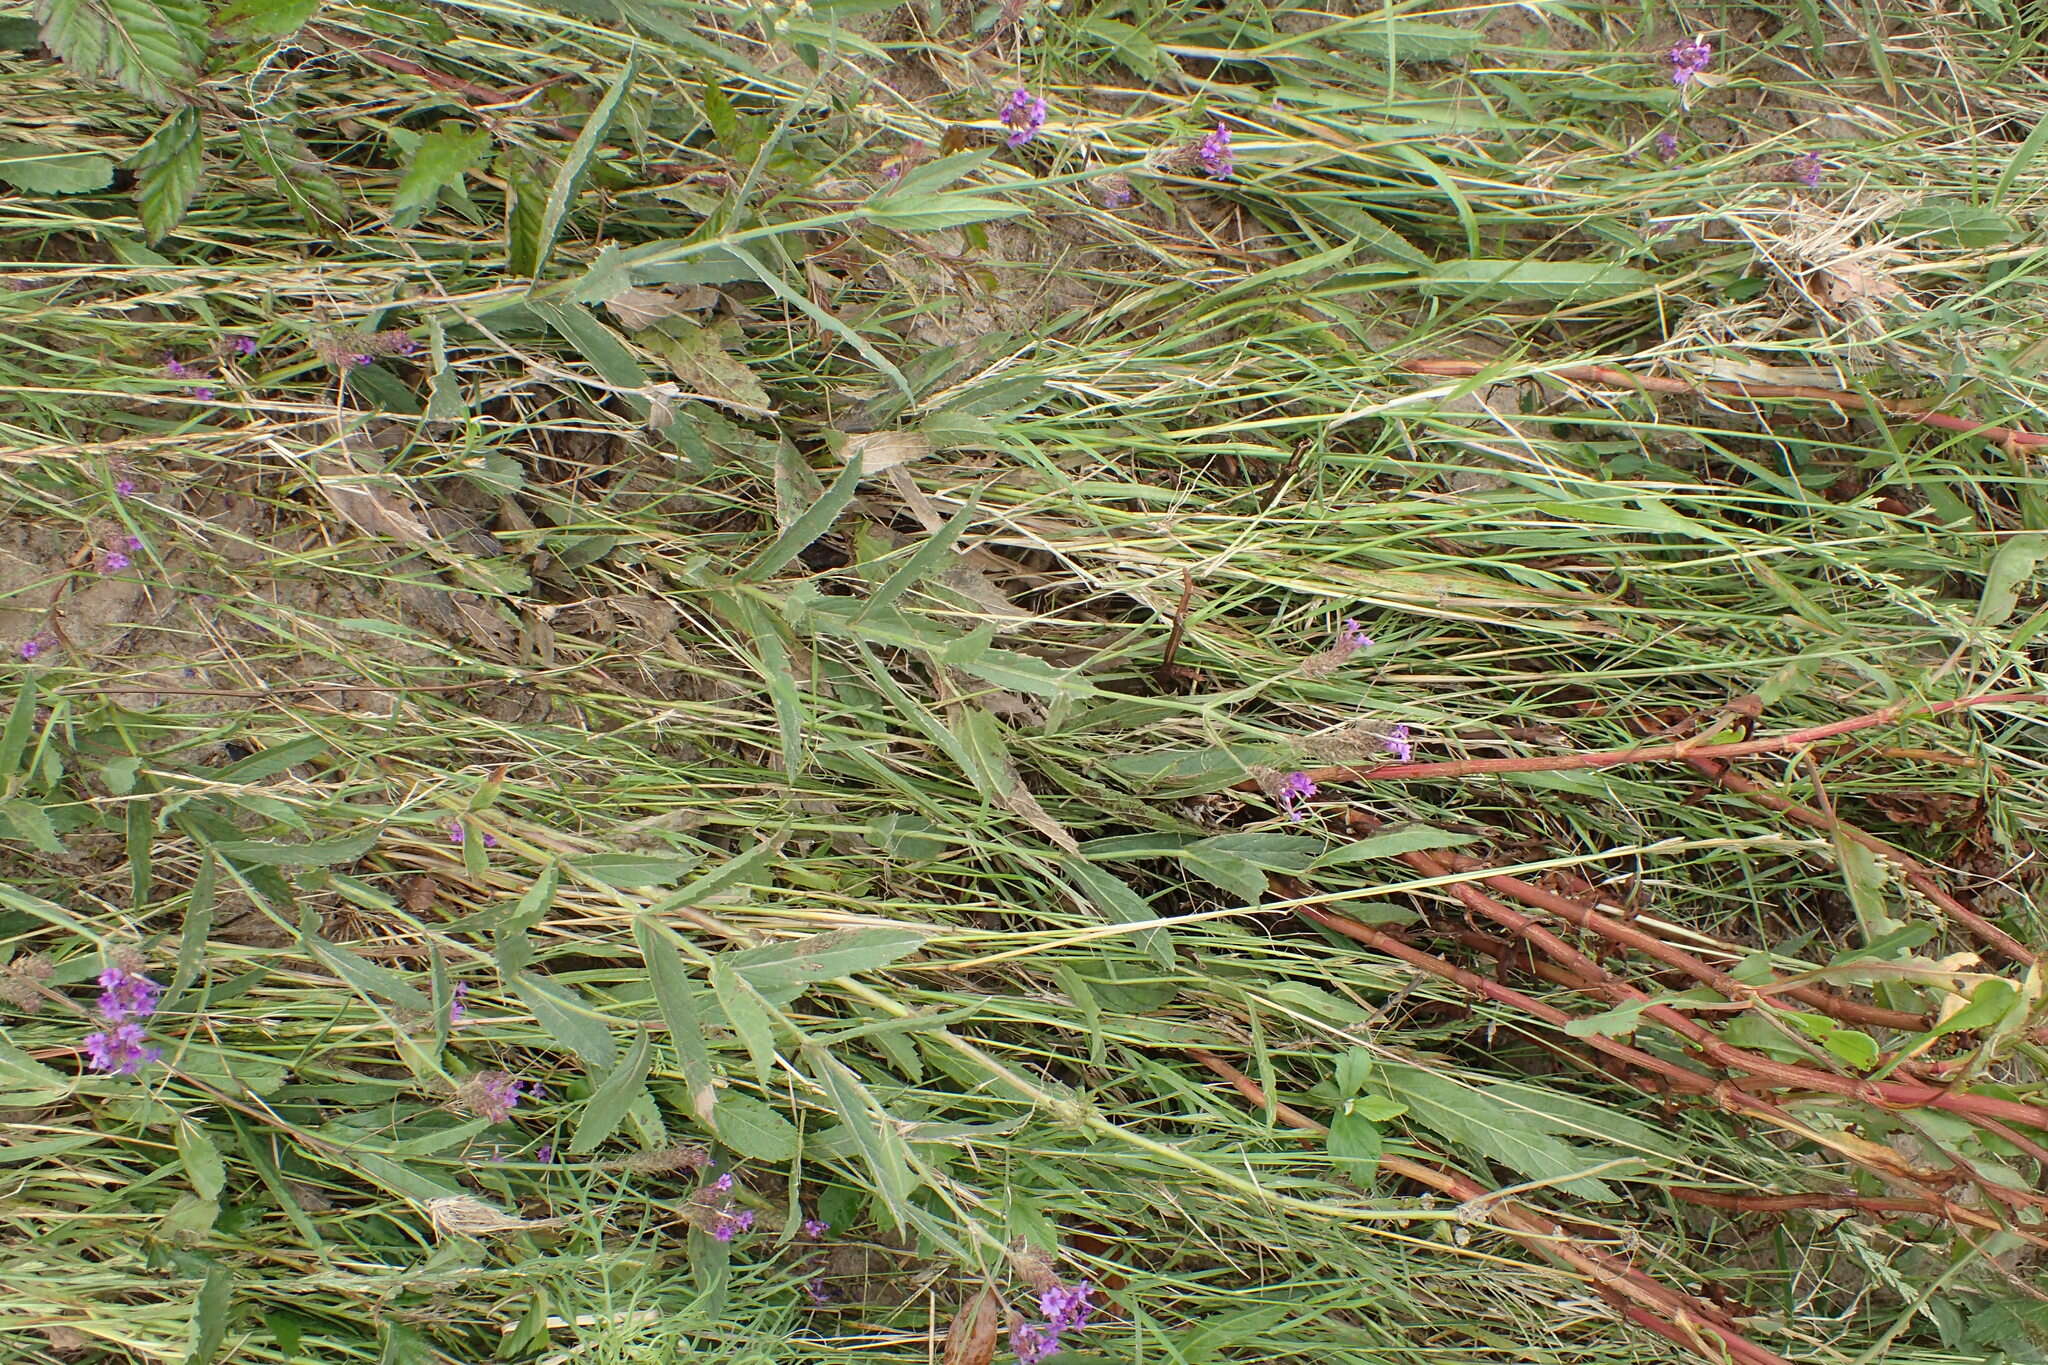 Image of tuberous vervain